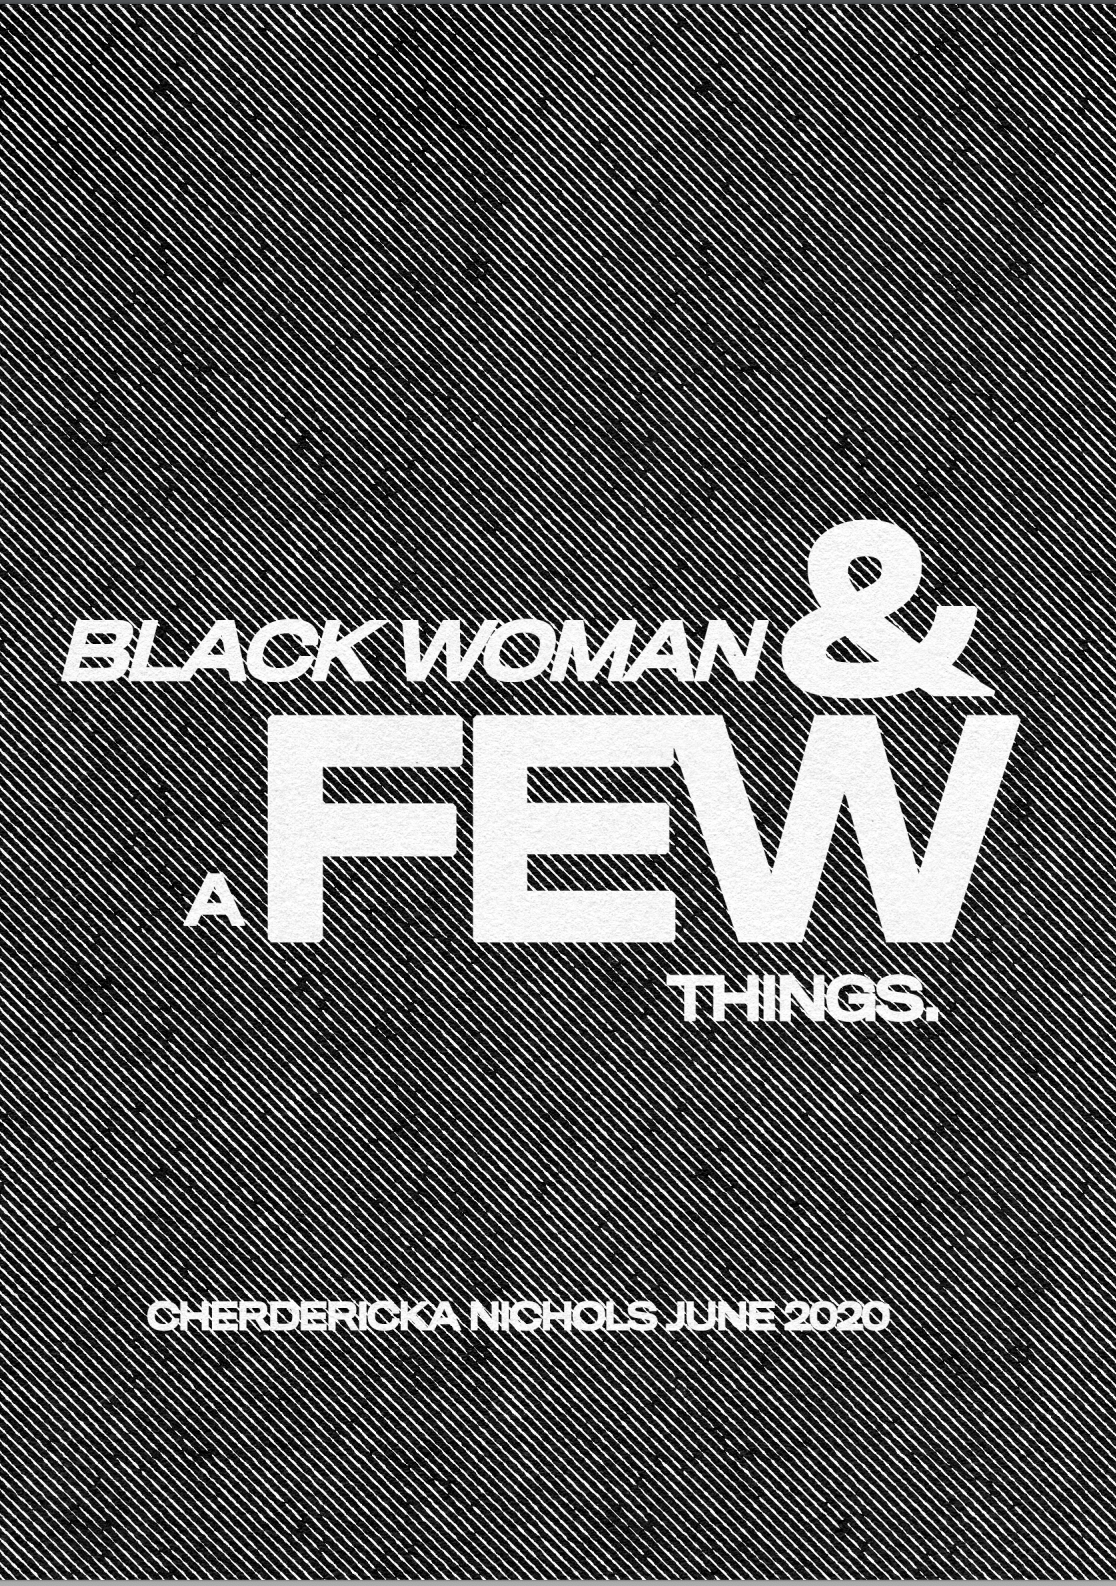 zine cover: Black Woman & a Few Things. plain text on textured background